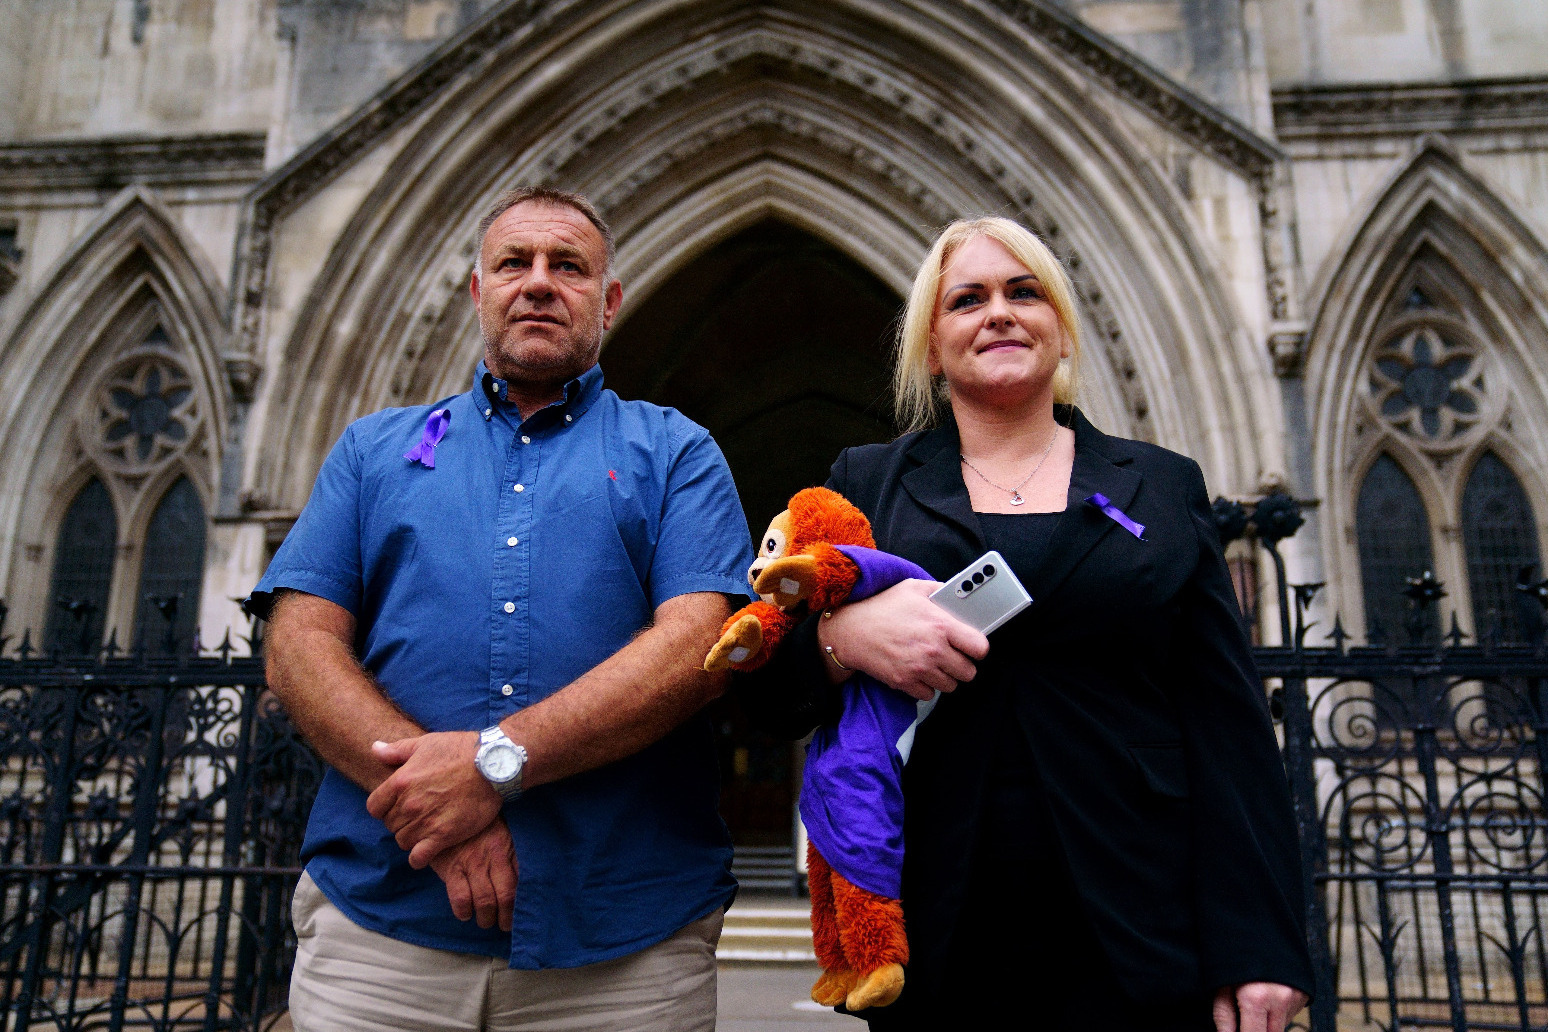 Archie Battersbee’s parents wait for ruling after Court of Appeal hearing 